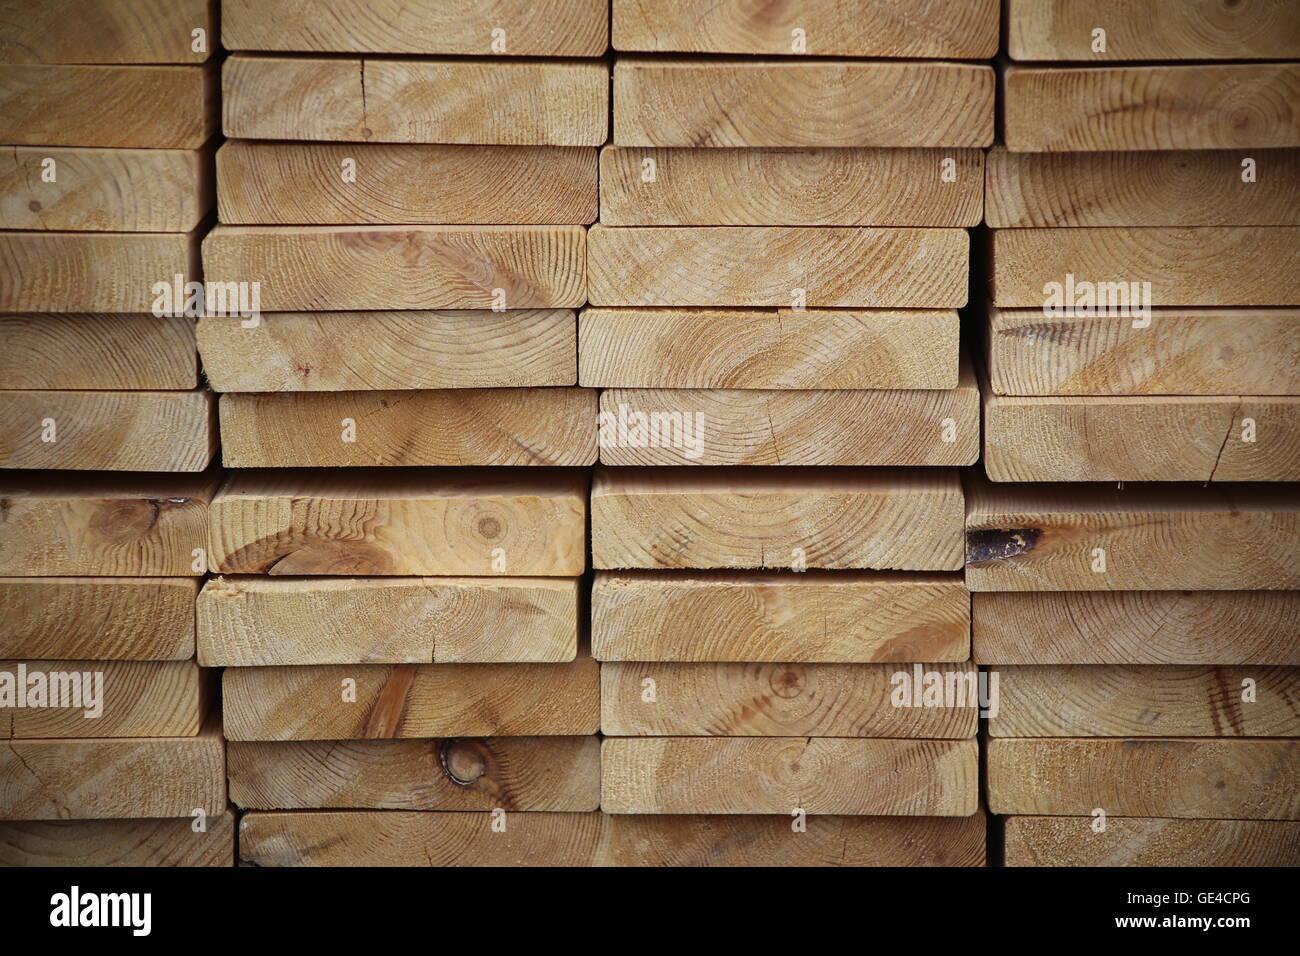 Lumbers. Organized stack of new lumbers, construction Lumbers, wood planks, raw planks Construction material. Close up. Stock Photo